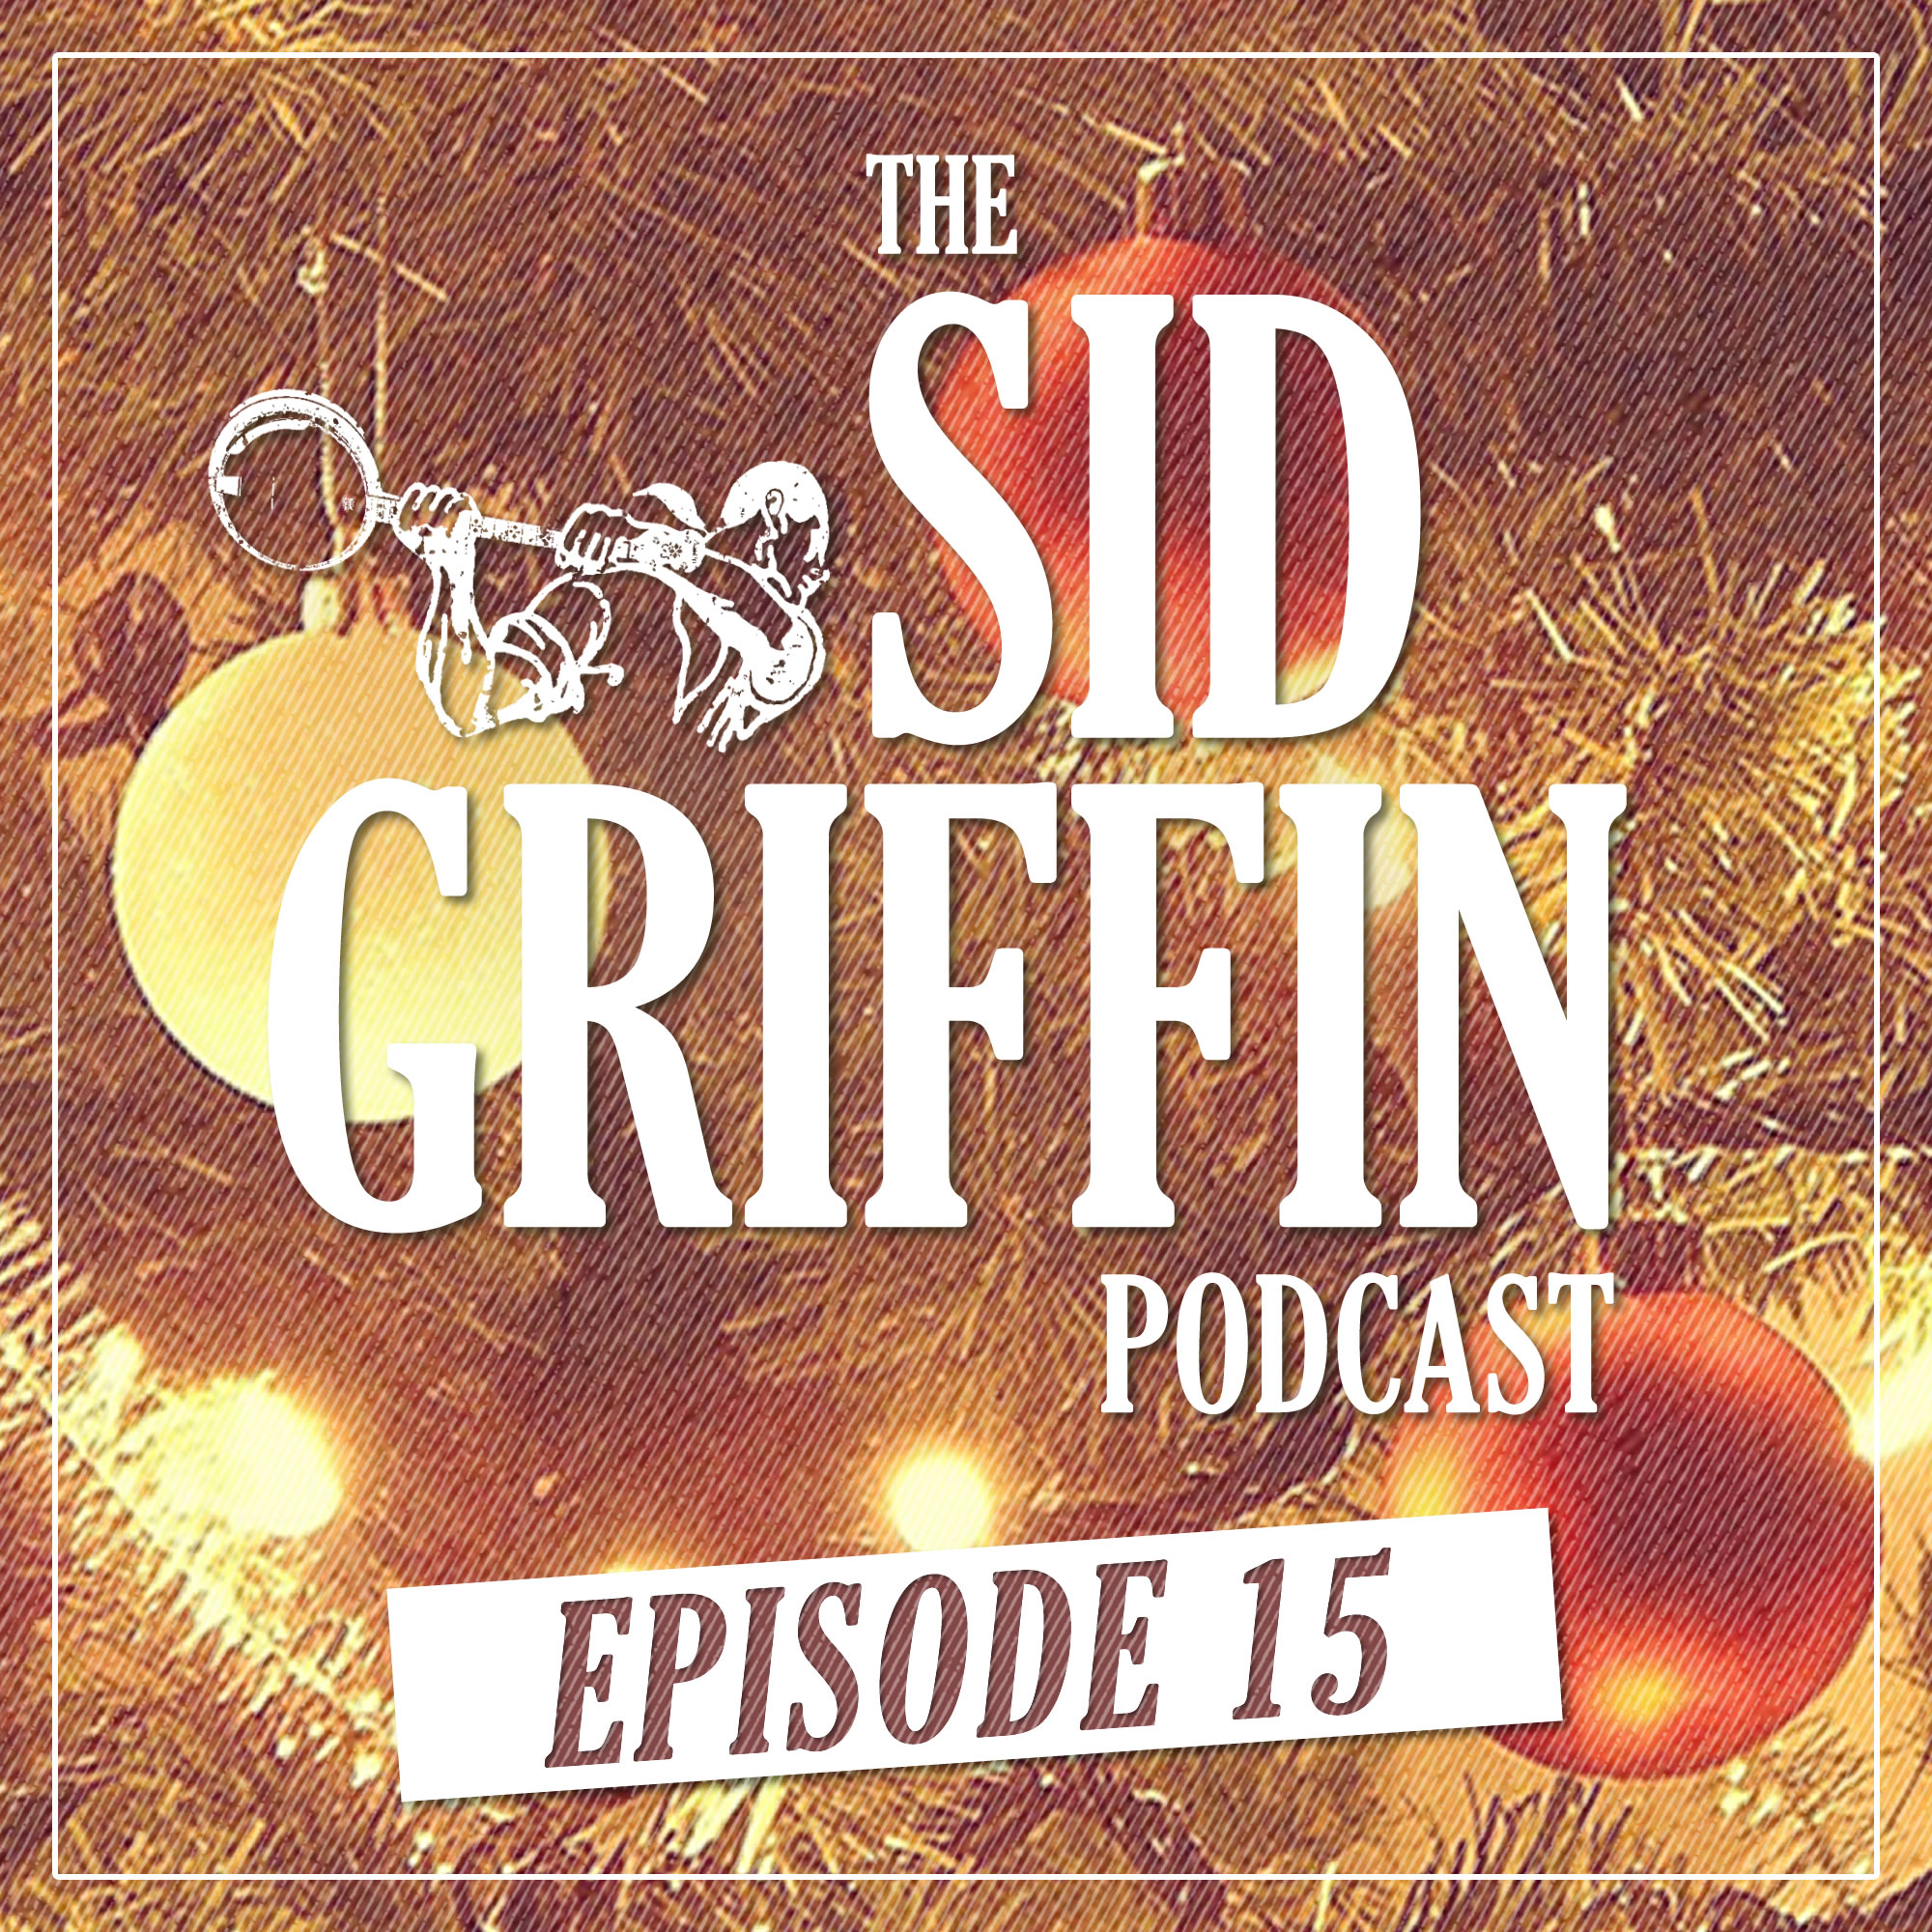 Call All Coal Porters, The Sid Griffin Podcast - No.15